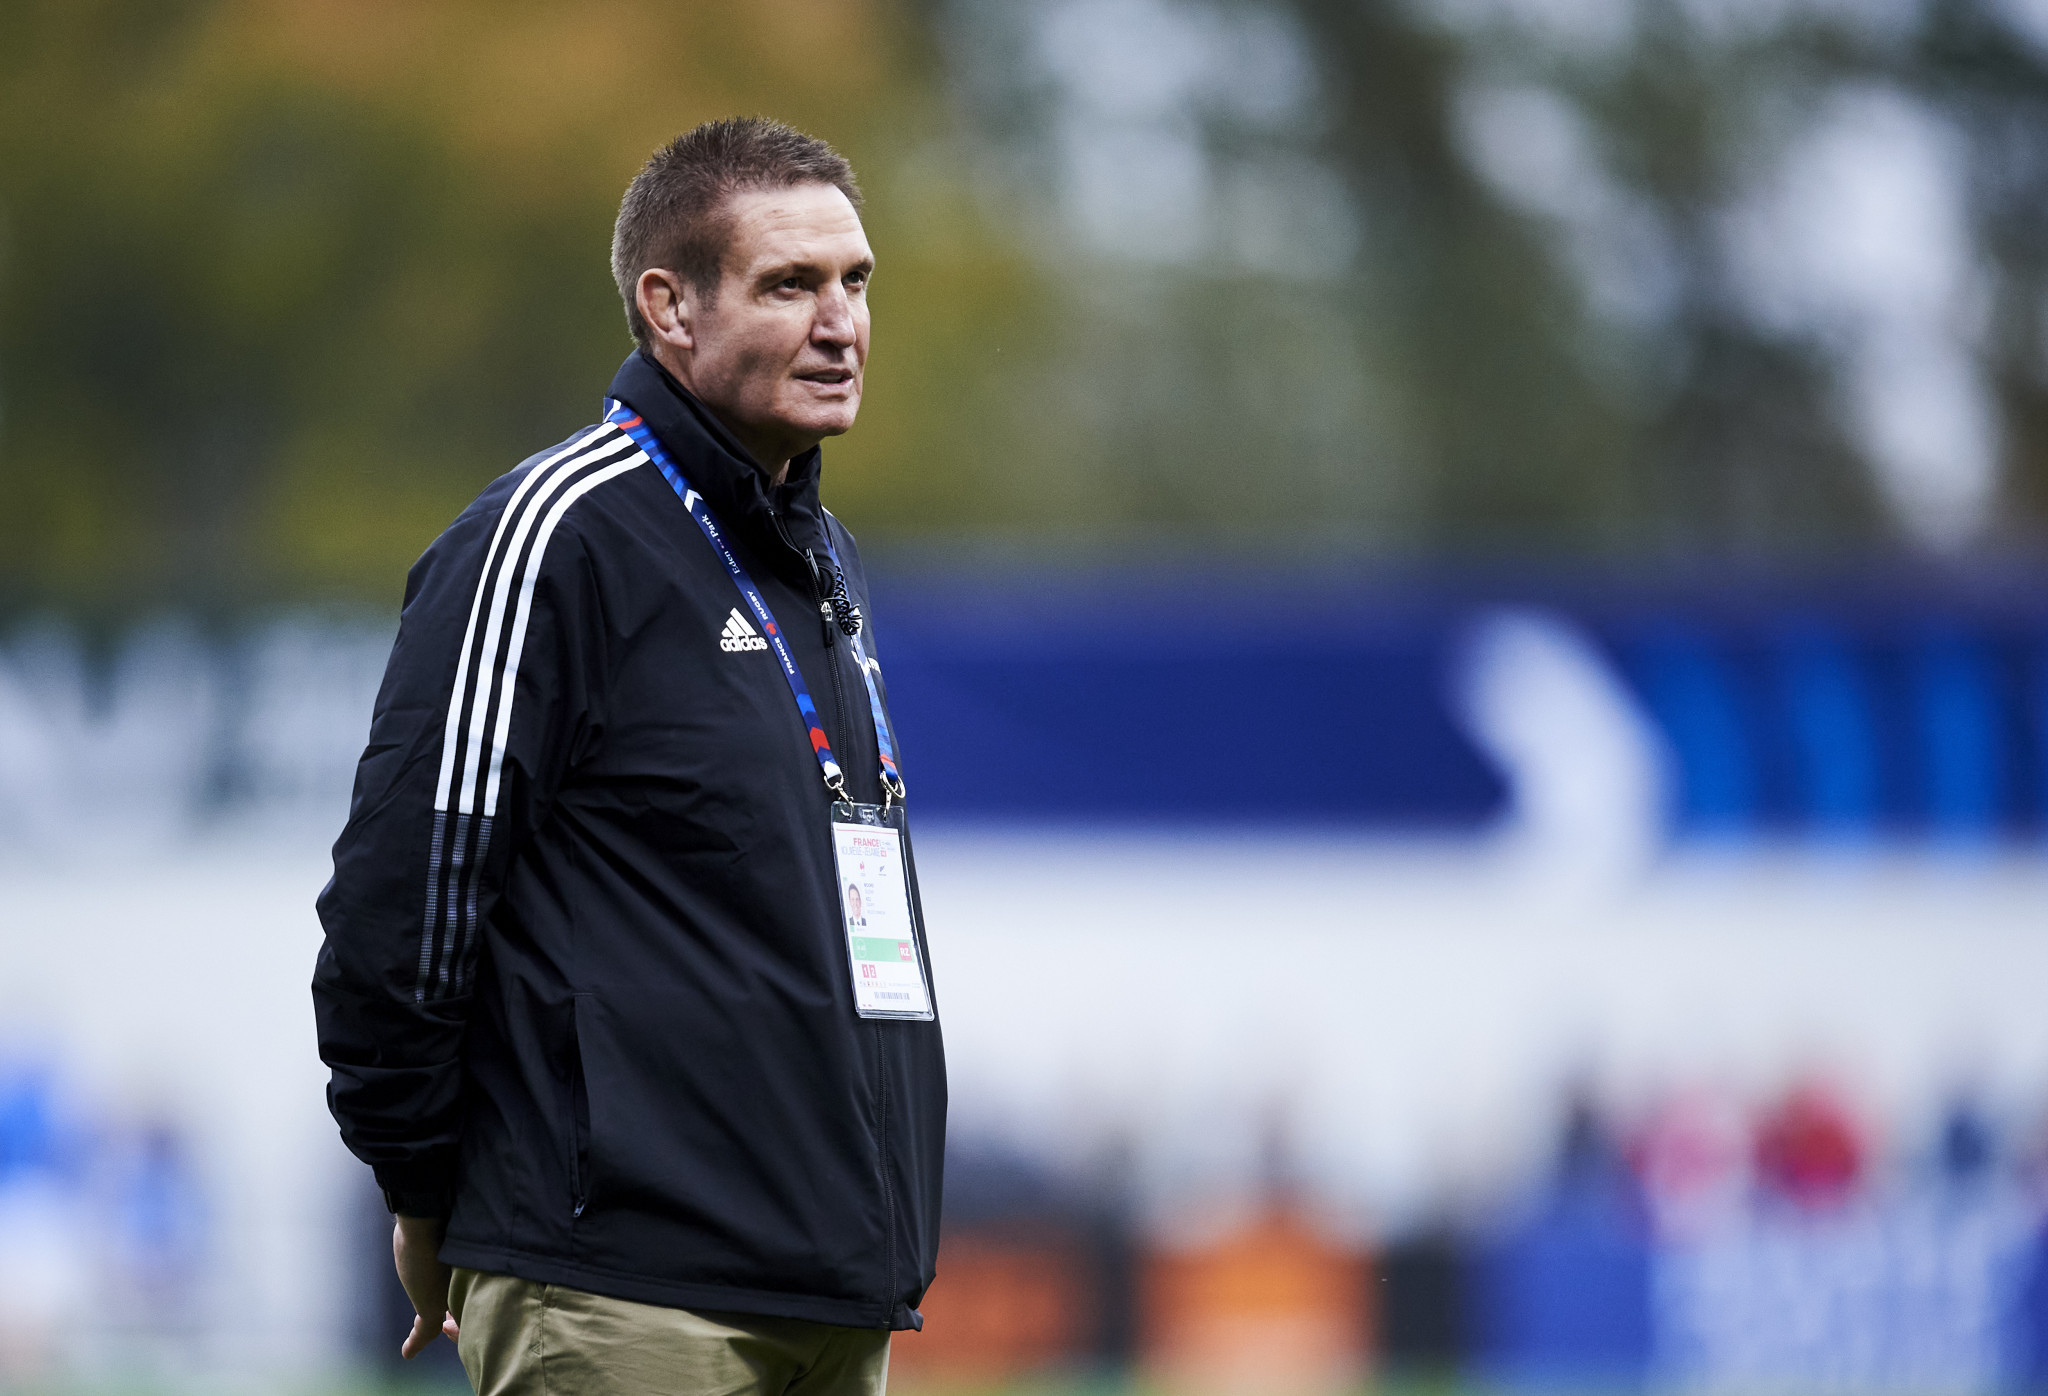 Black Ferns head coach Moore resigns in wake of culture review but denies allegations